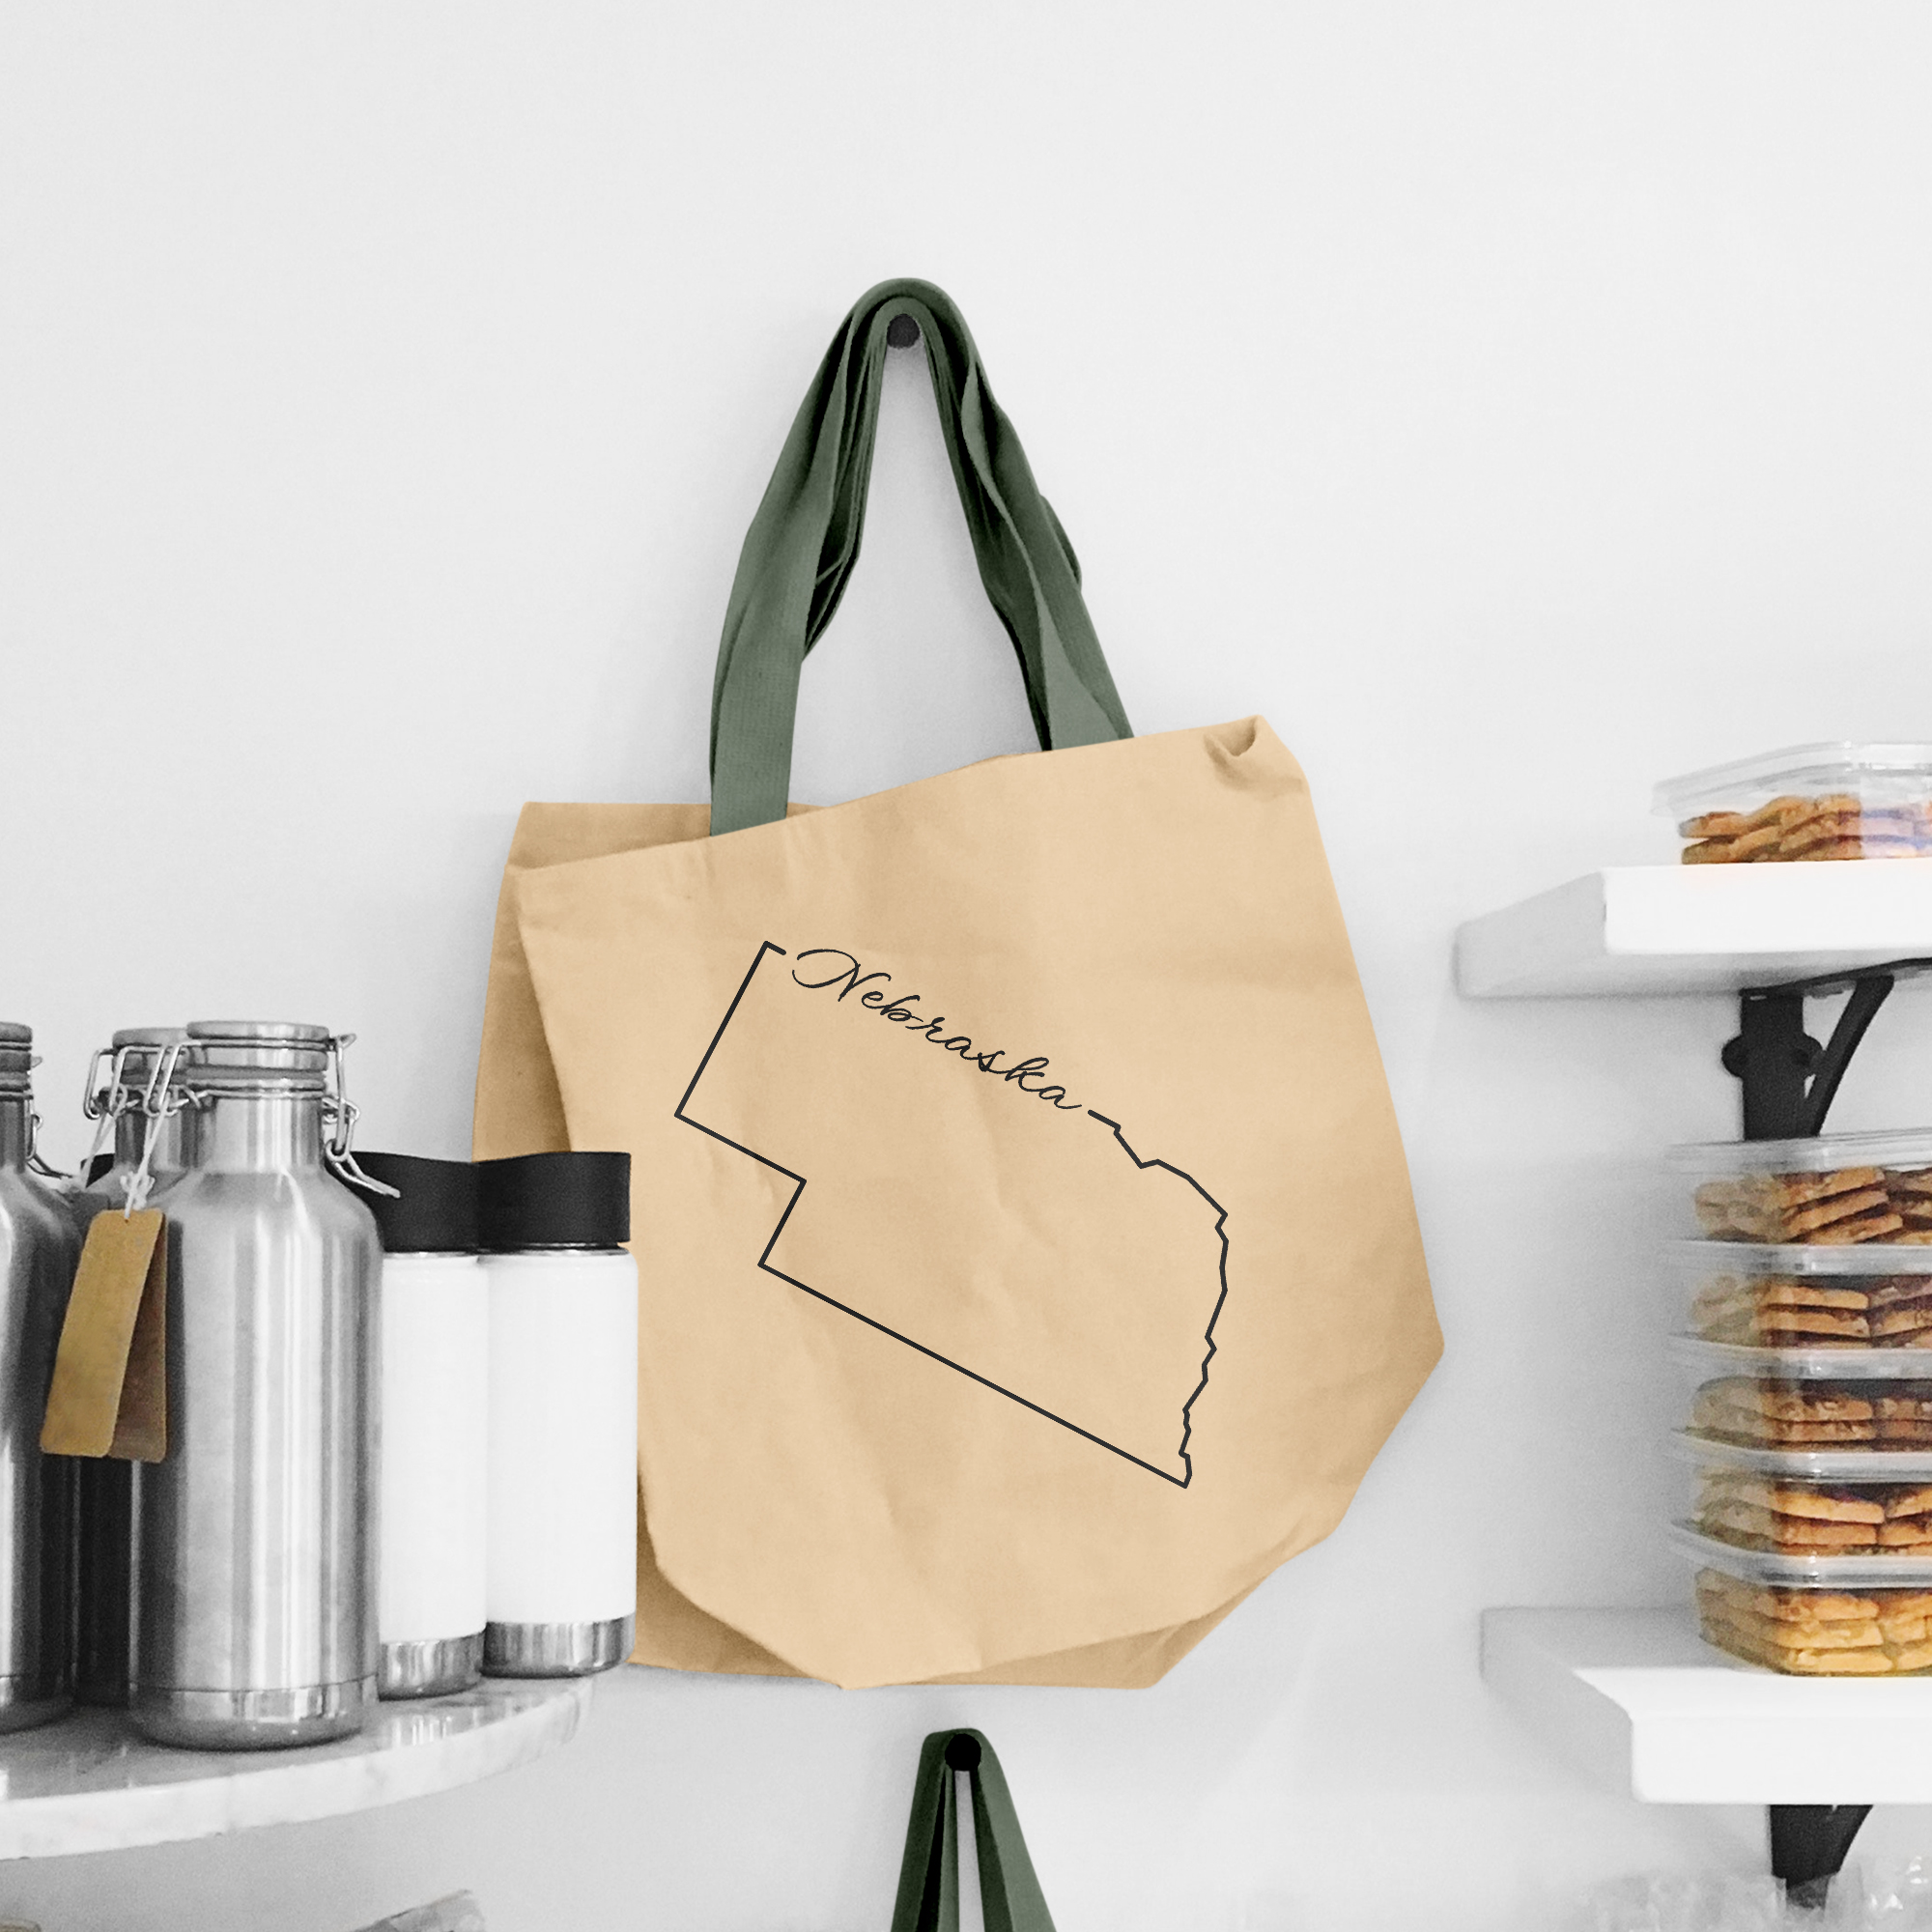 Black illustration of map of Nebraska on the beige shopping bag with dirty green handle.